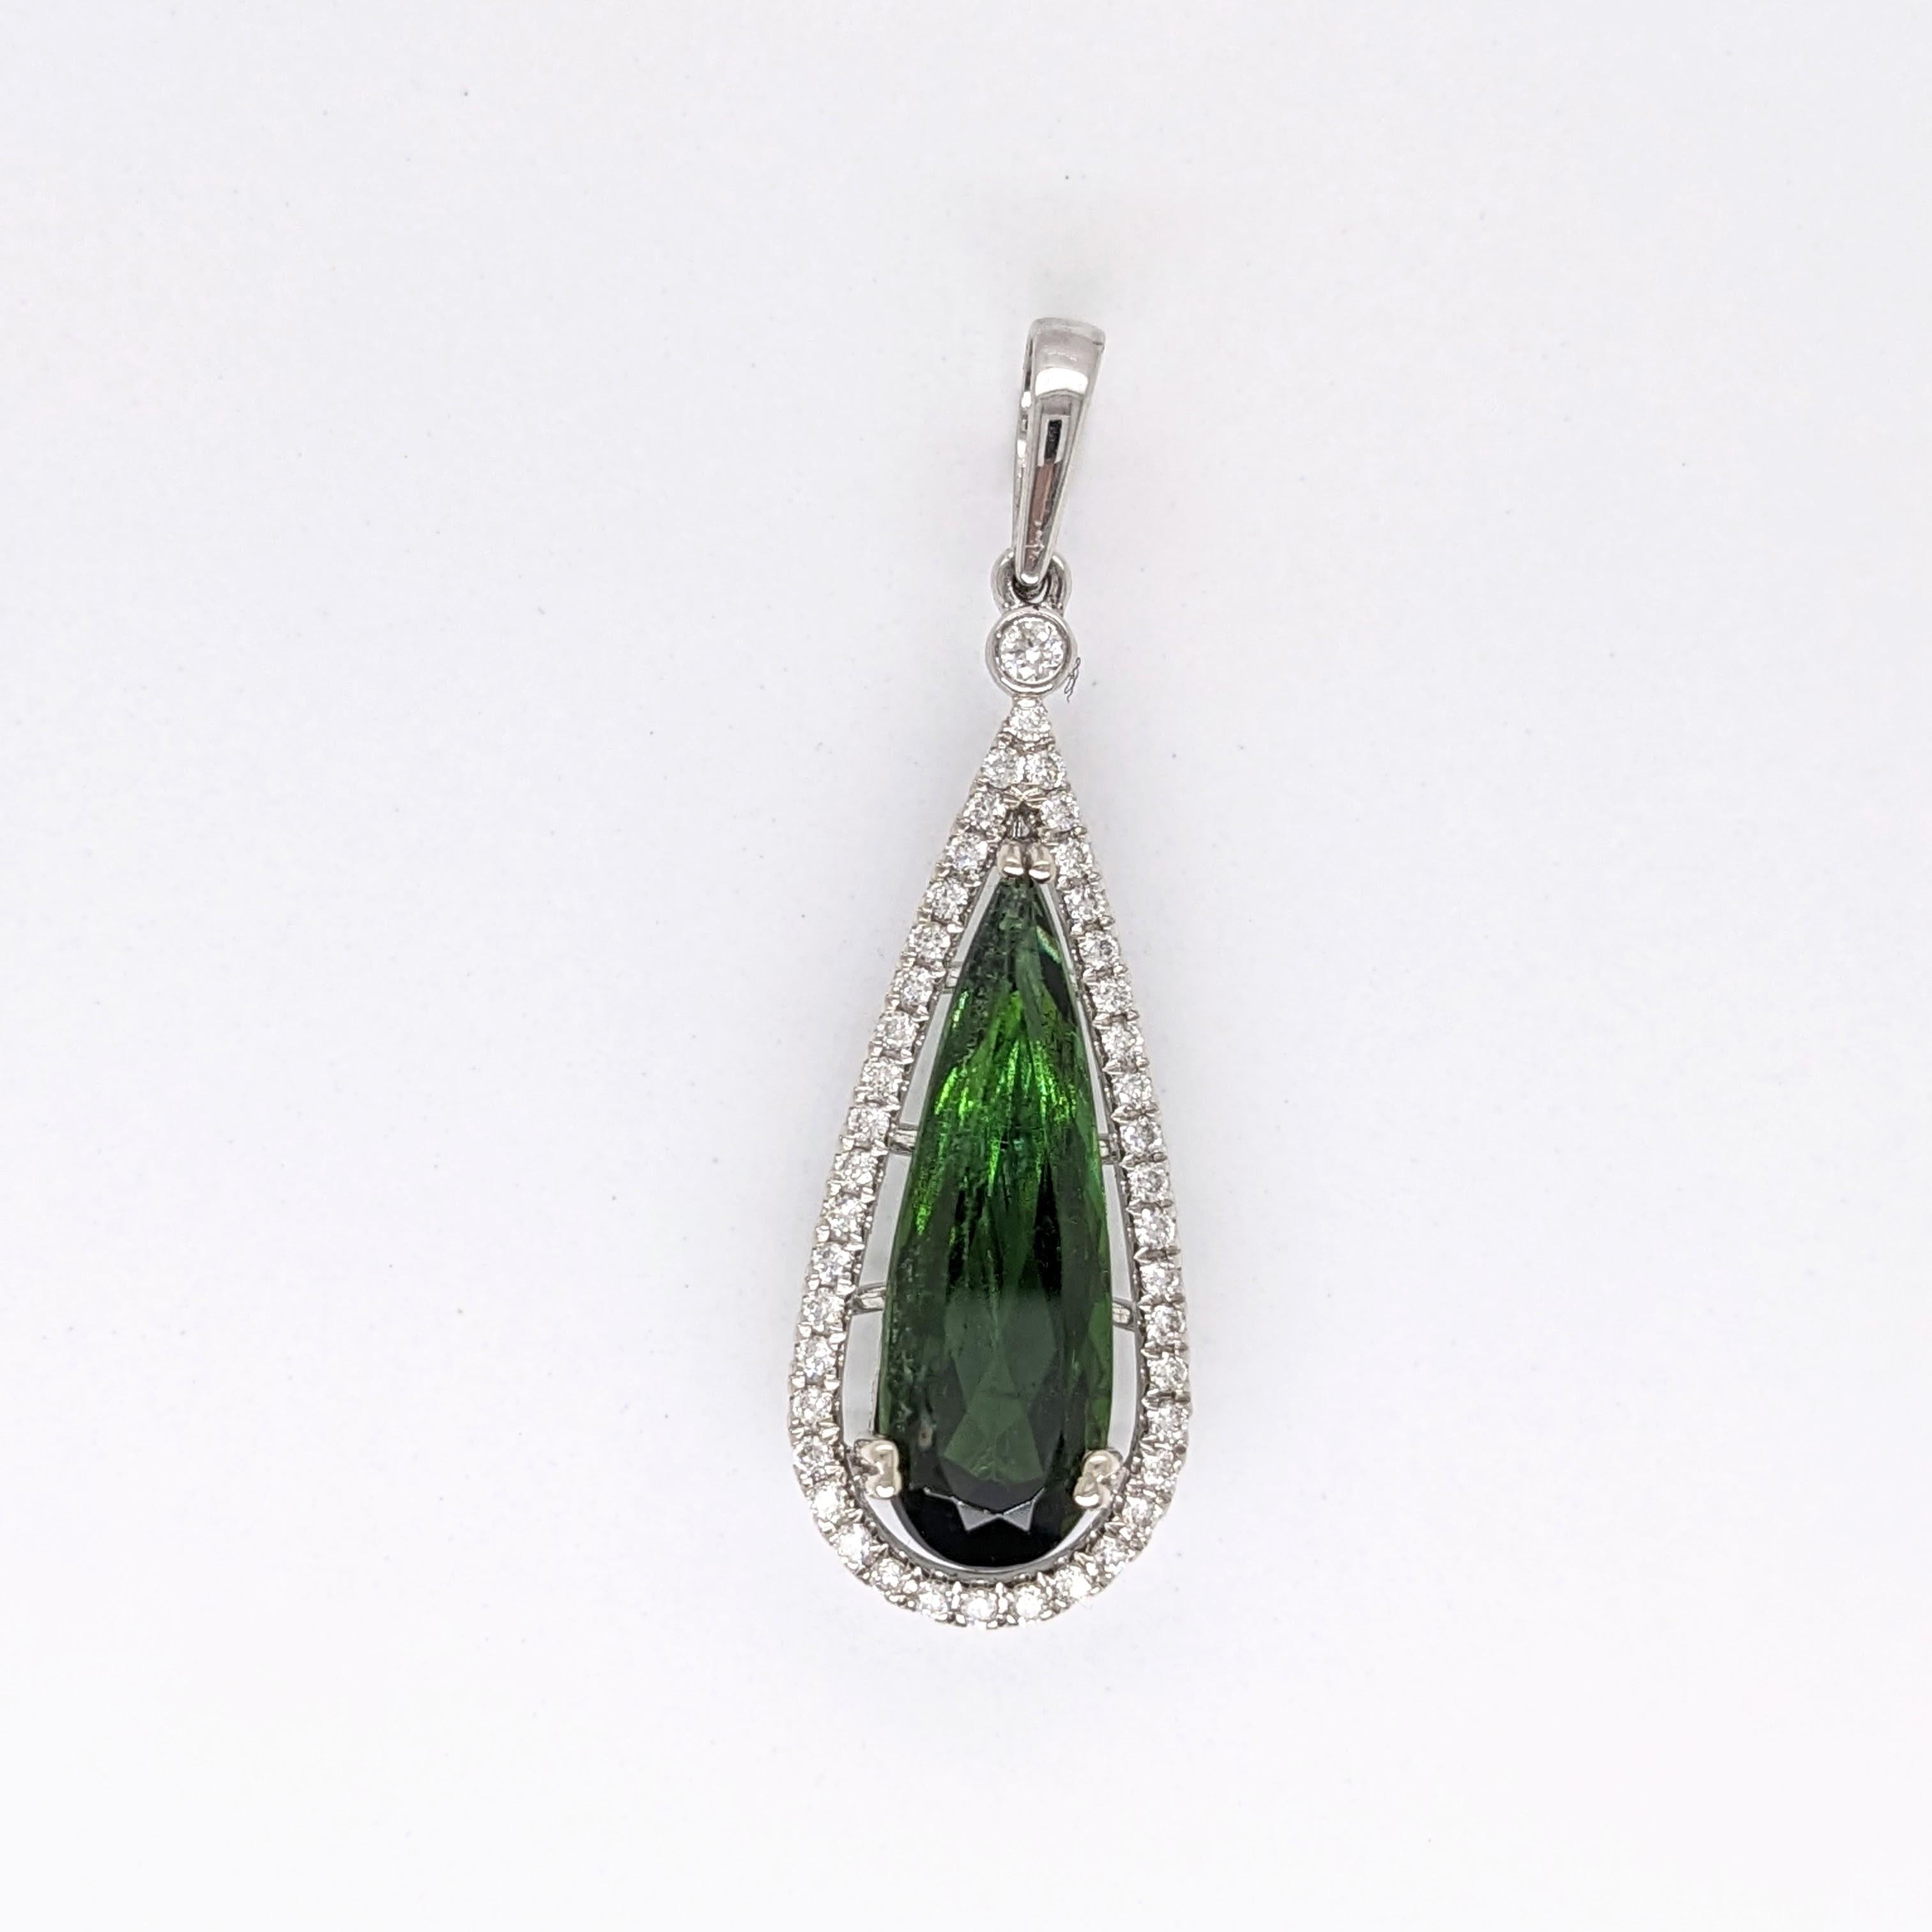 3.4ct Tourmaline Pendant w Earth Mined Diamonds in Solid 14K Gold Pear 20x6mm